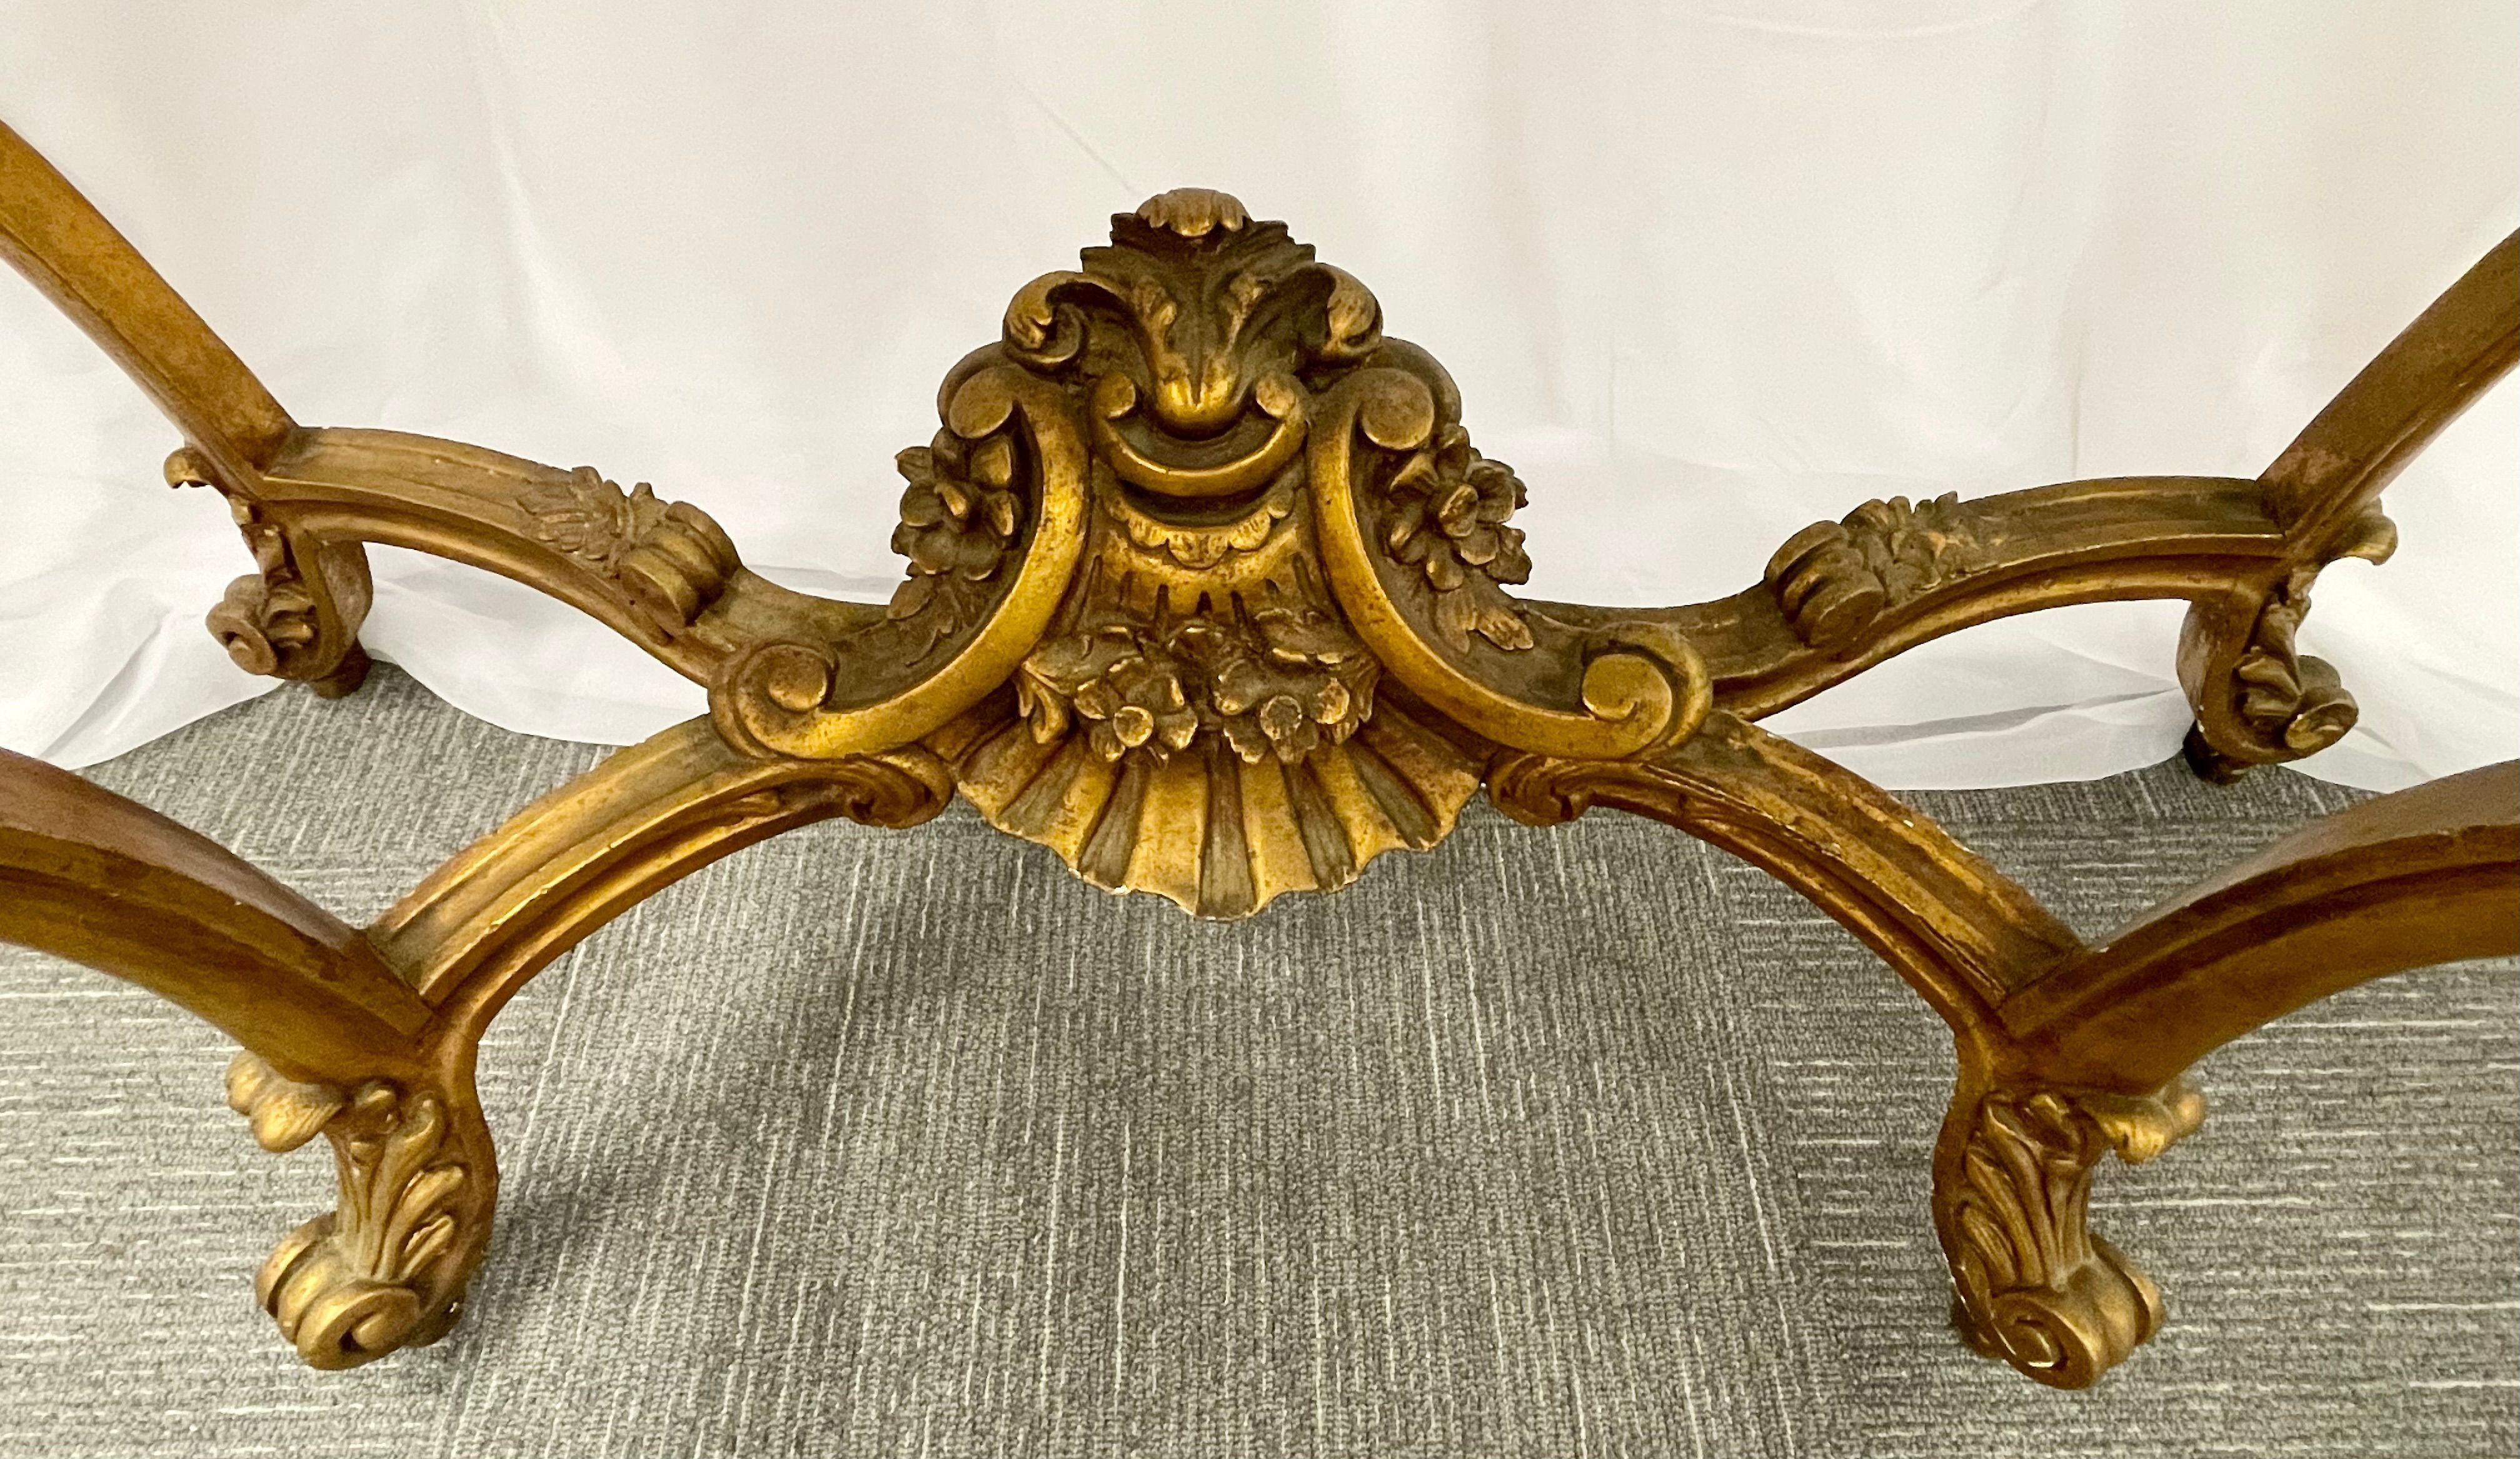 Marble-Top Louis XV Style Console Table by Jansen Exquisite Carved Details 1920s For Sale 9